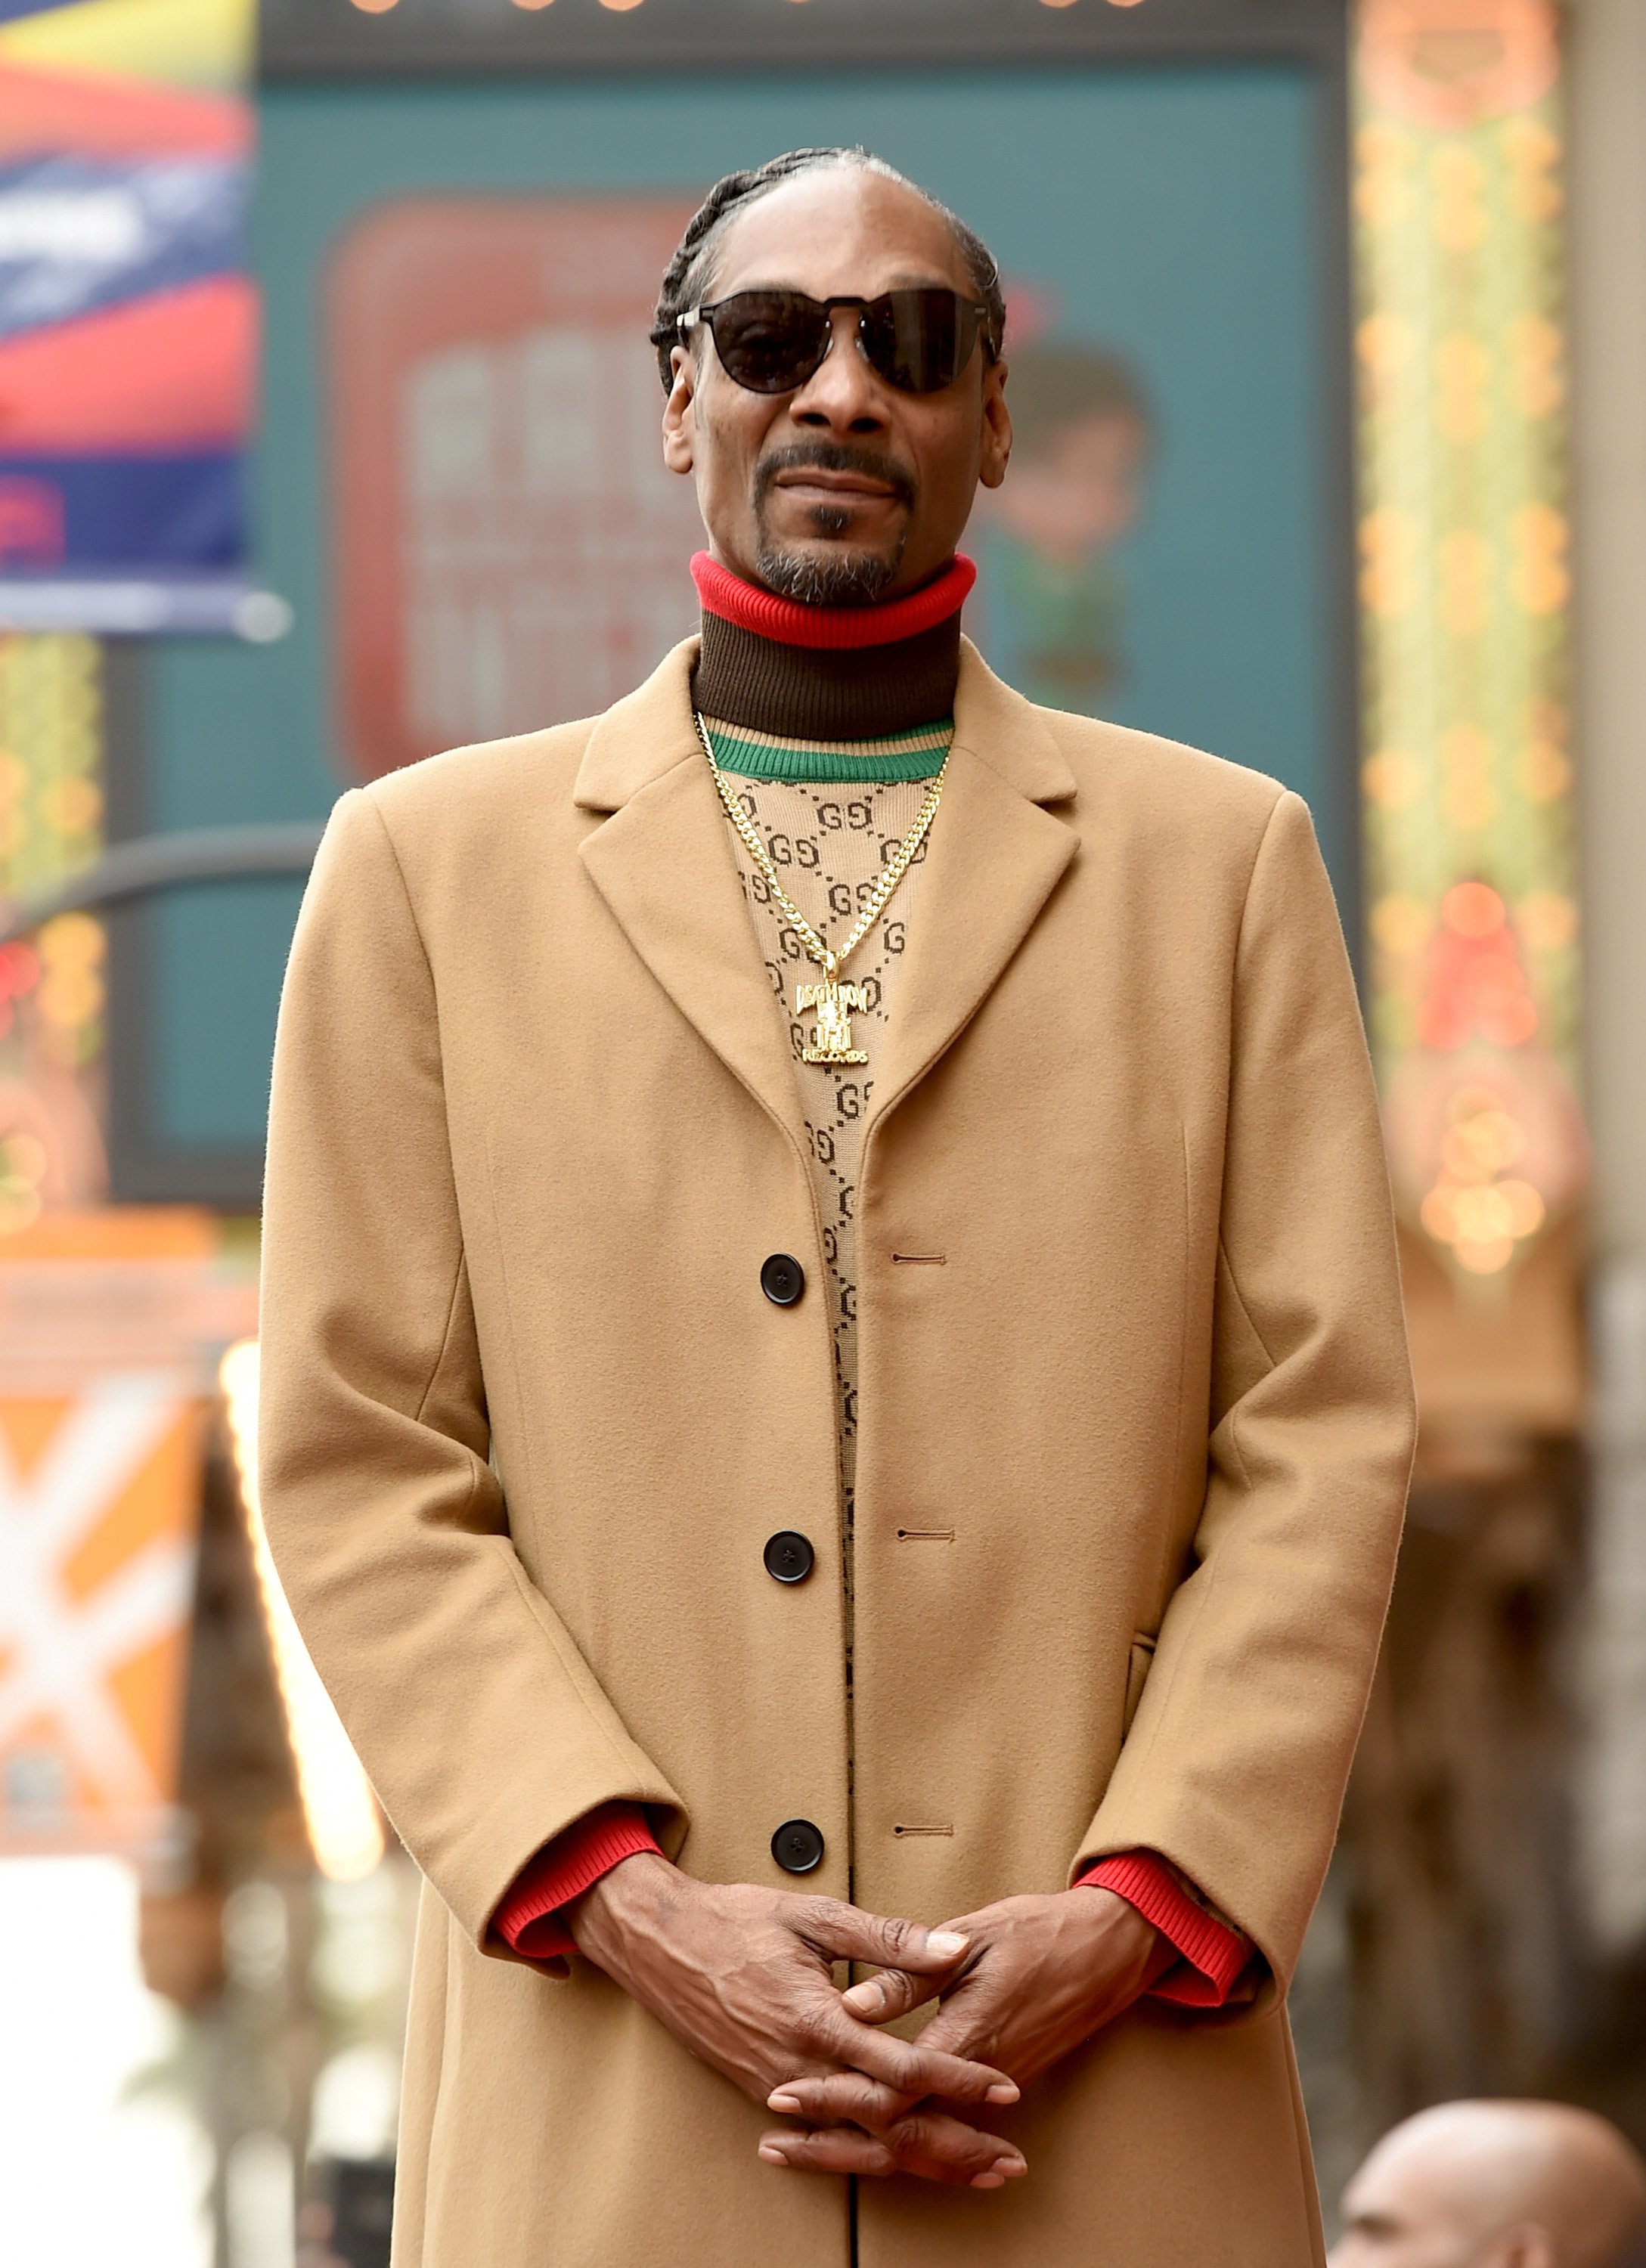 Snoop Dogg getting his star on The Hollywood Walk Of Fame in LA on Nov. 19, 2018. | Photo: Getty Images.